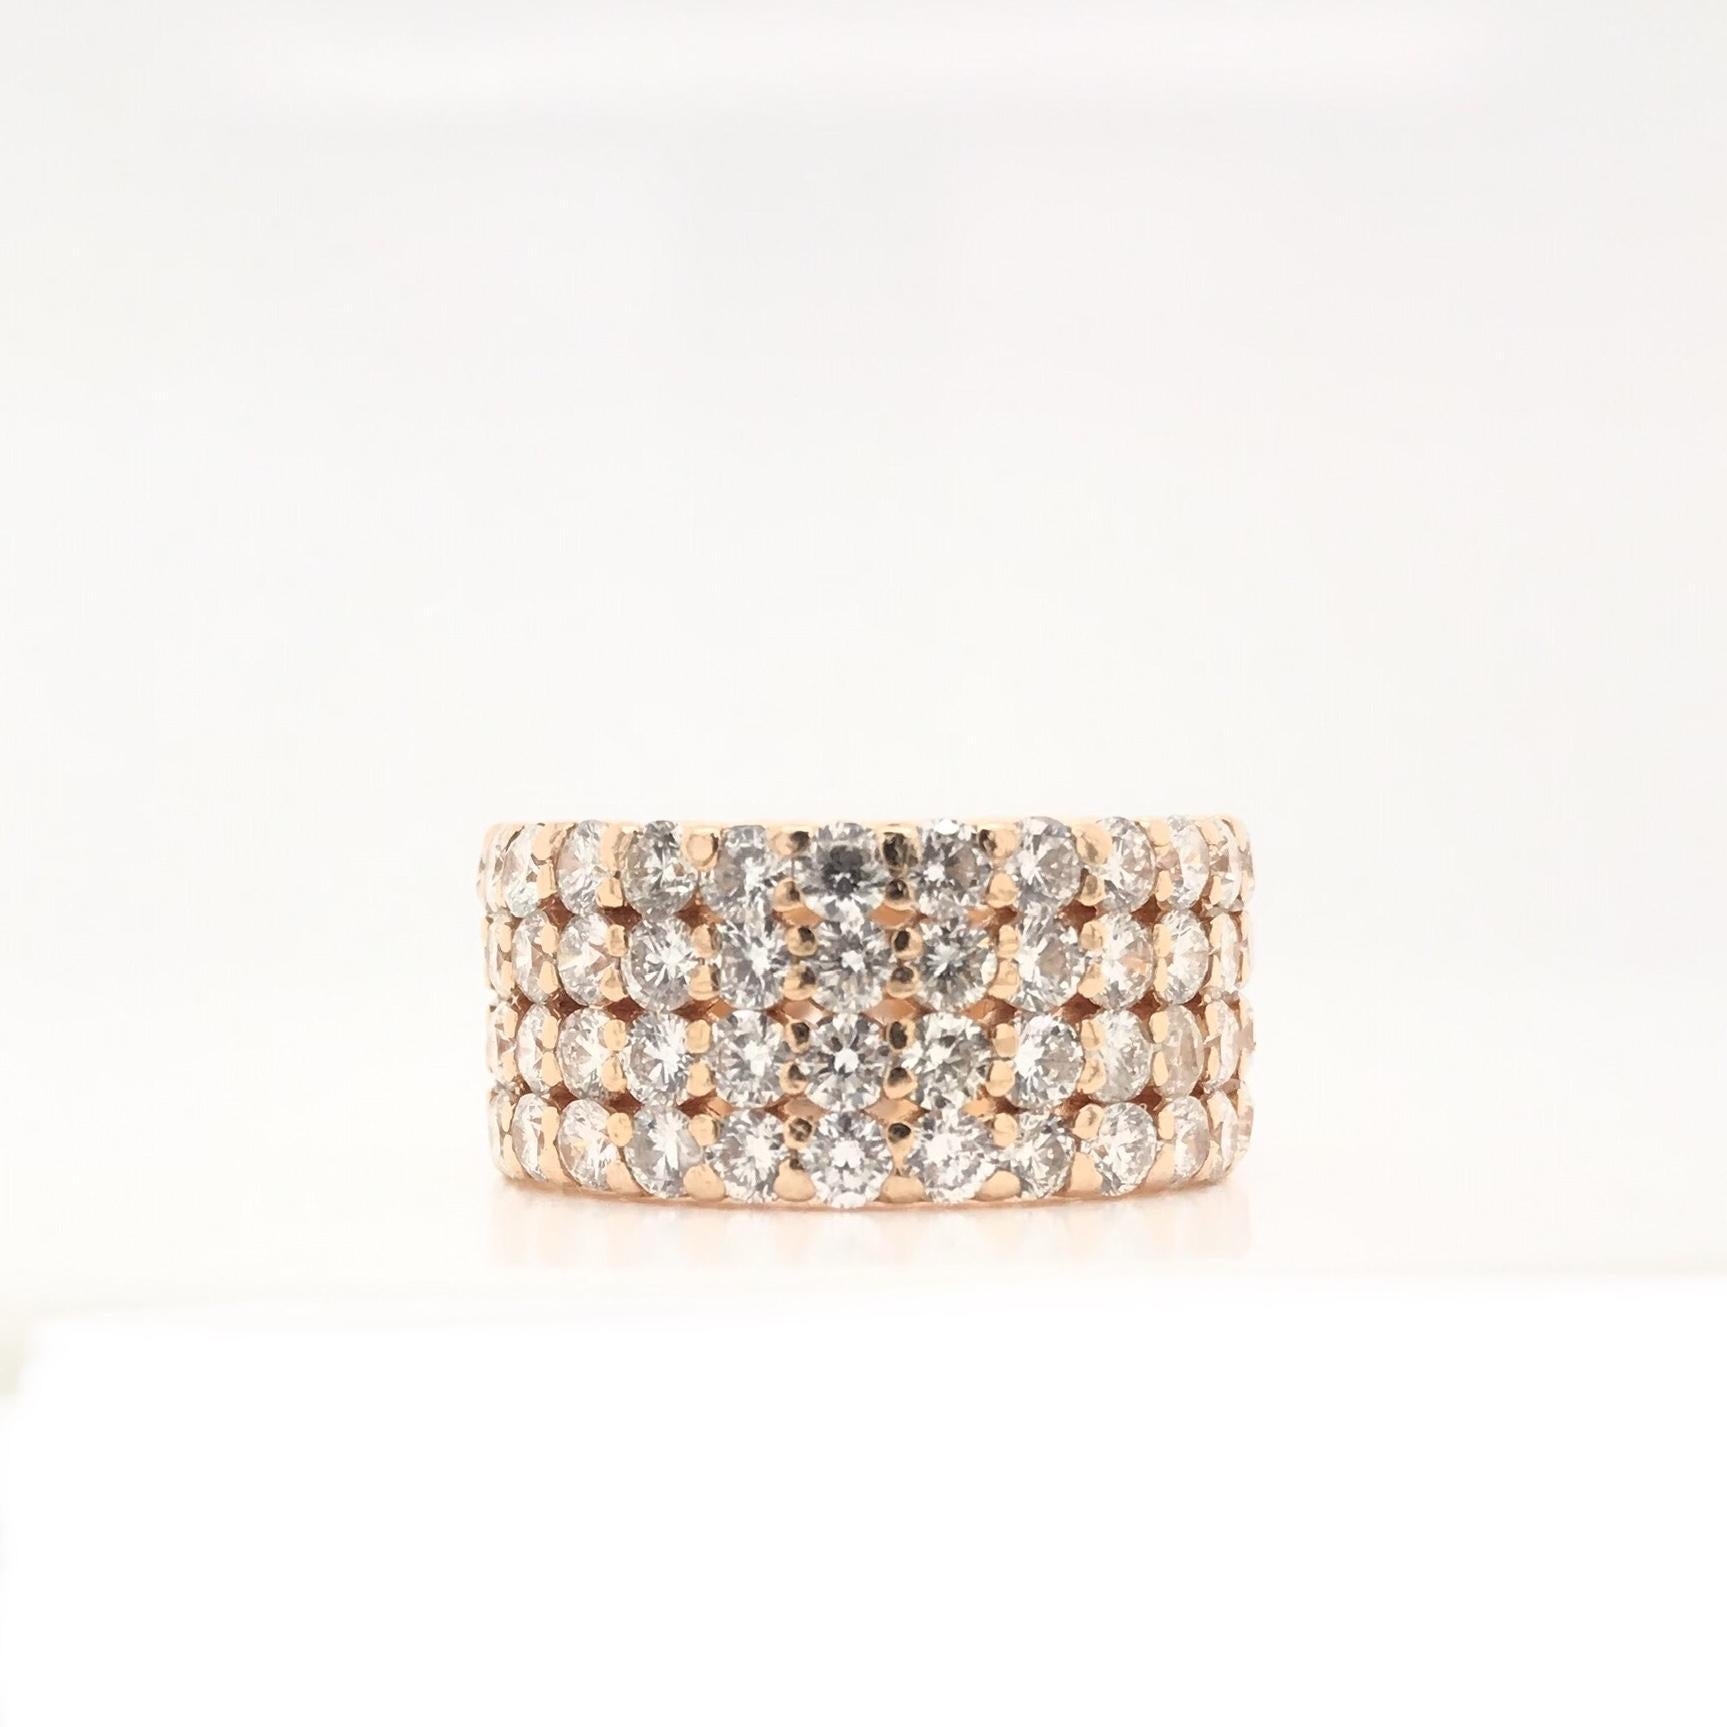 This exceptional contemporary piece features five carats of dazzling white diamonds set in 18K rose gold. The 104 diamonds grade approximately H in color and SI1 in clarity. This wide designer style band would function beautifully as an alternative